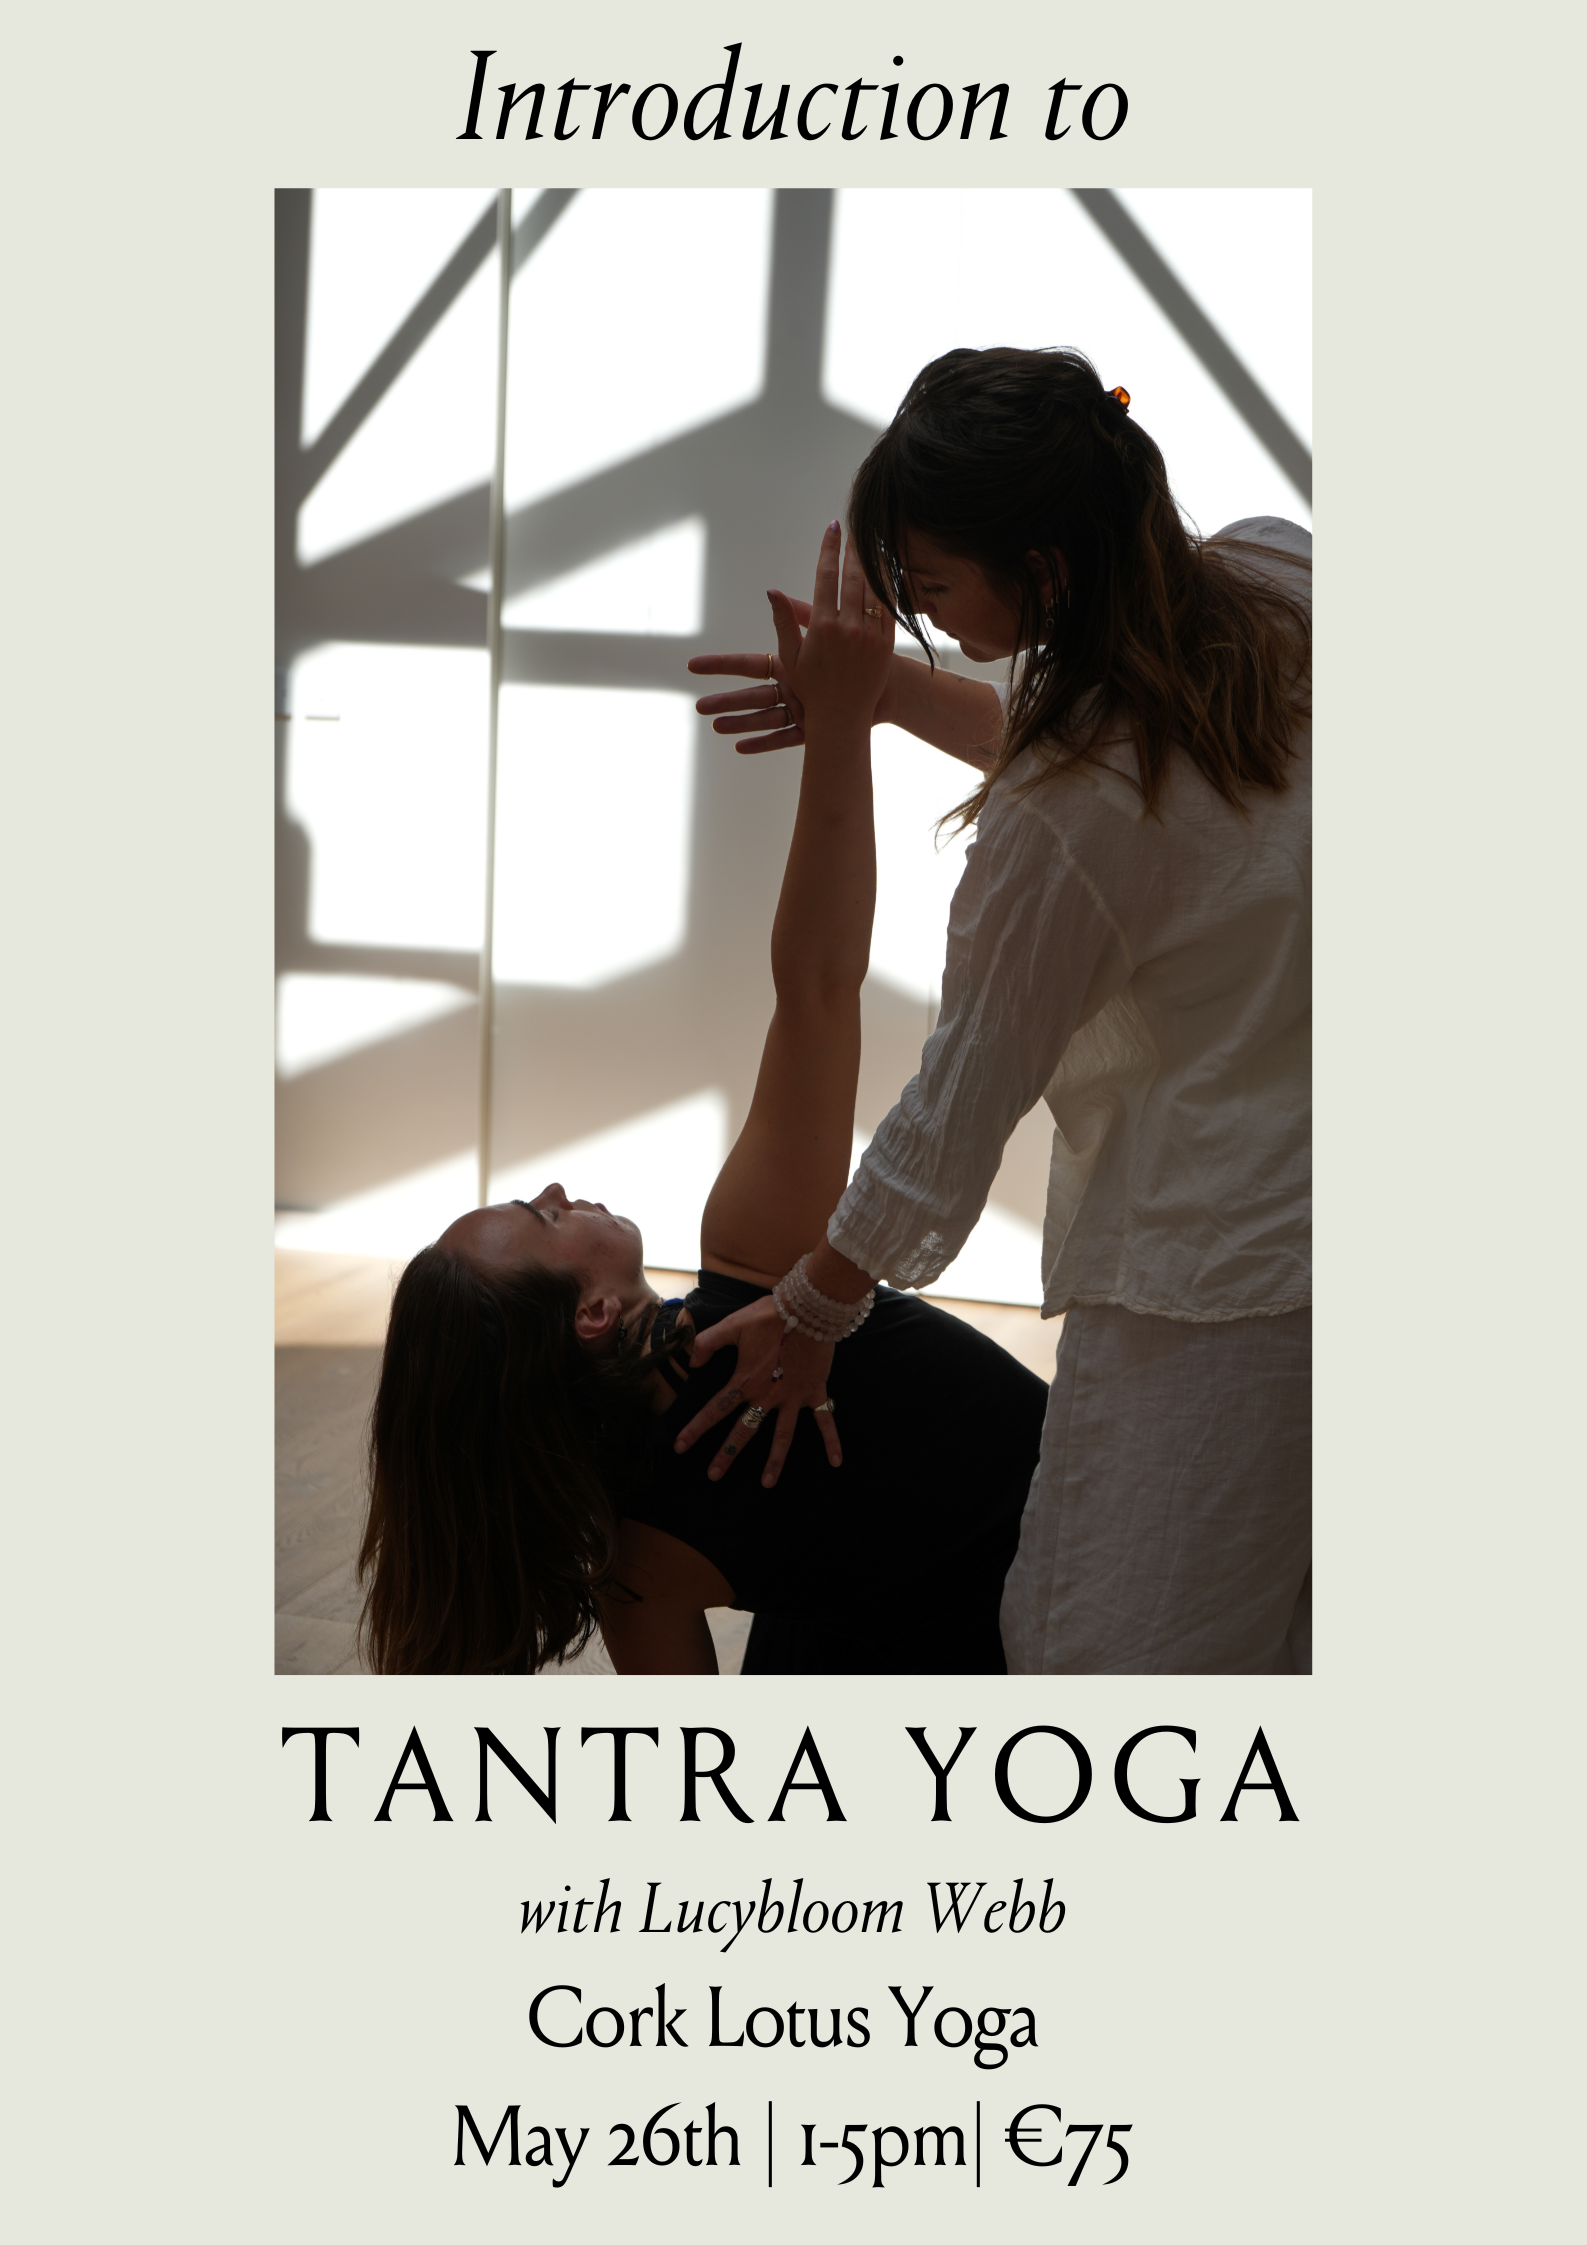 Introduction to Tantra Yoga